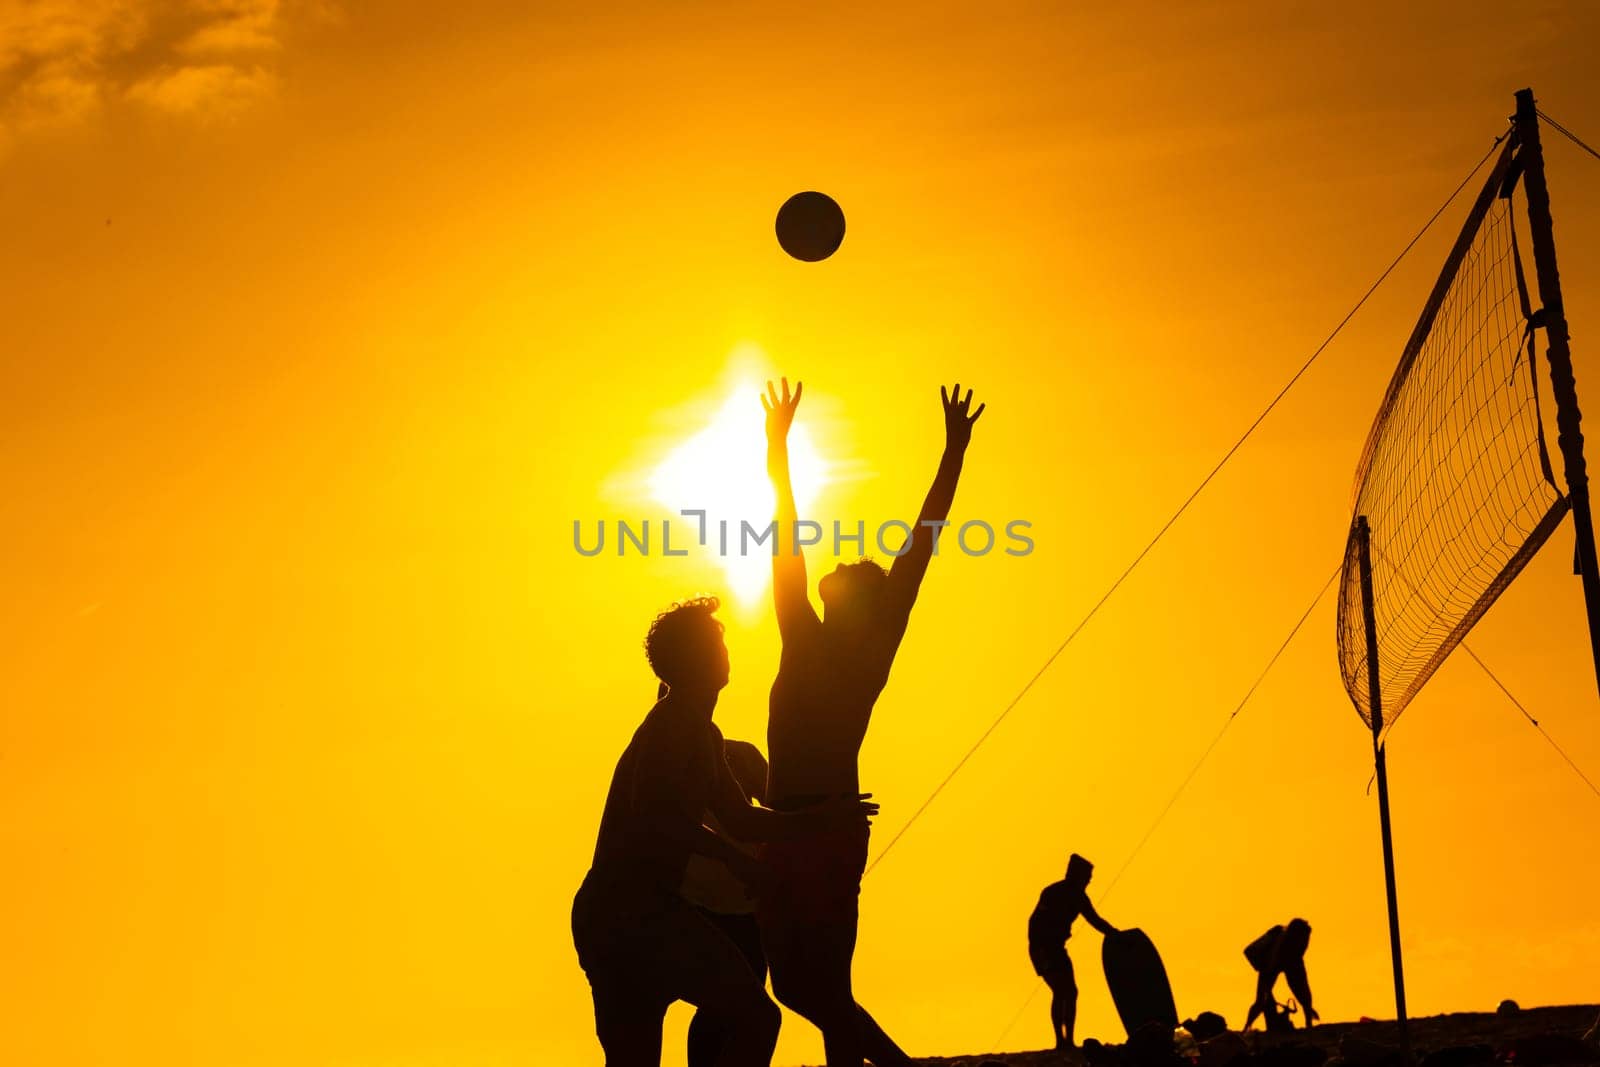 Young People Playing with a Ball at Sunset by the Ocean by Studia72